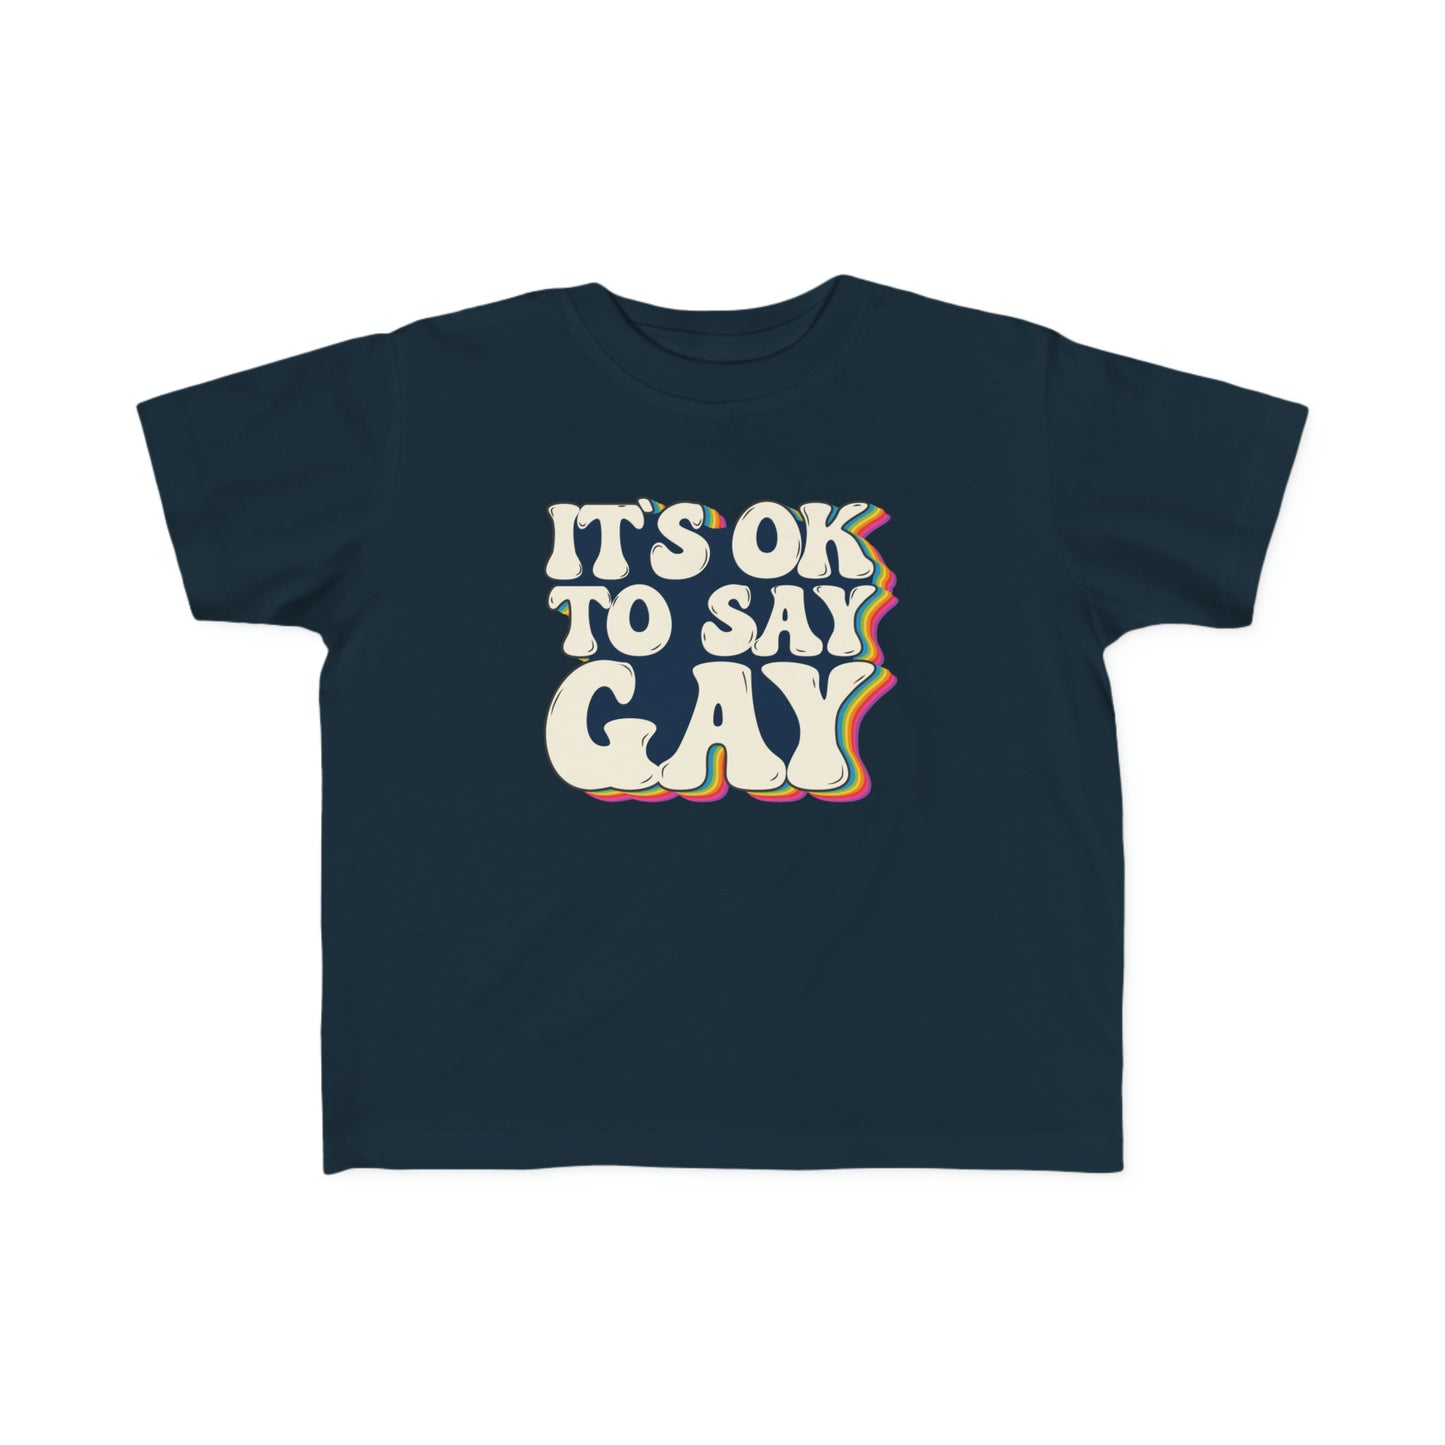 “It’s OK to Say Gay” Toddler's Tee